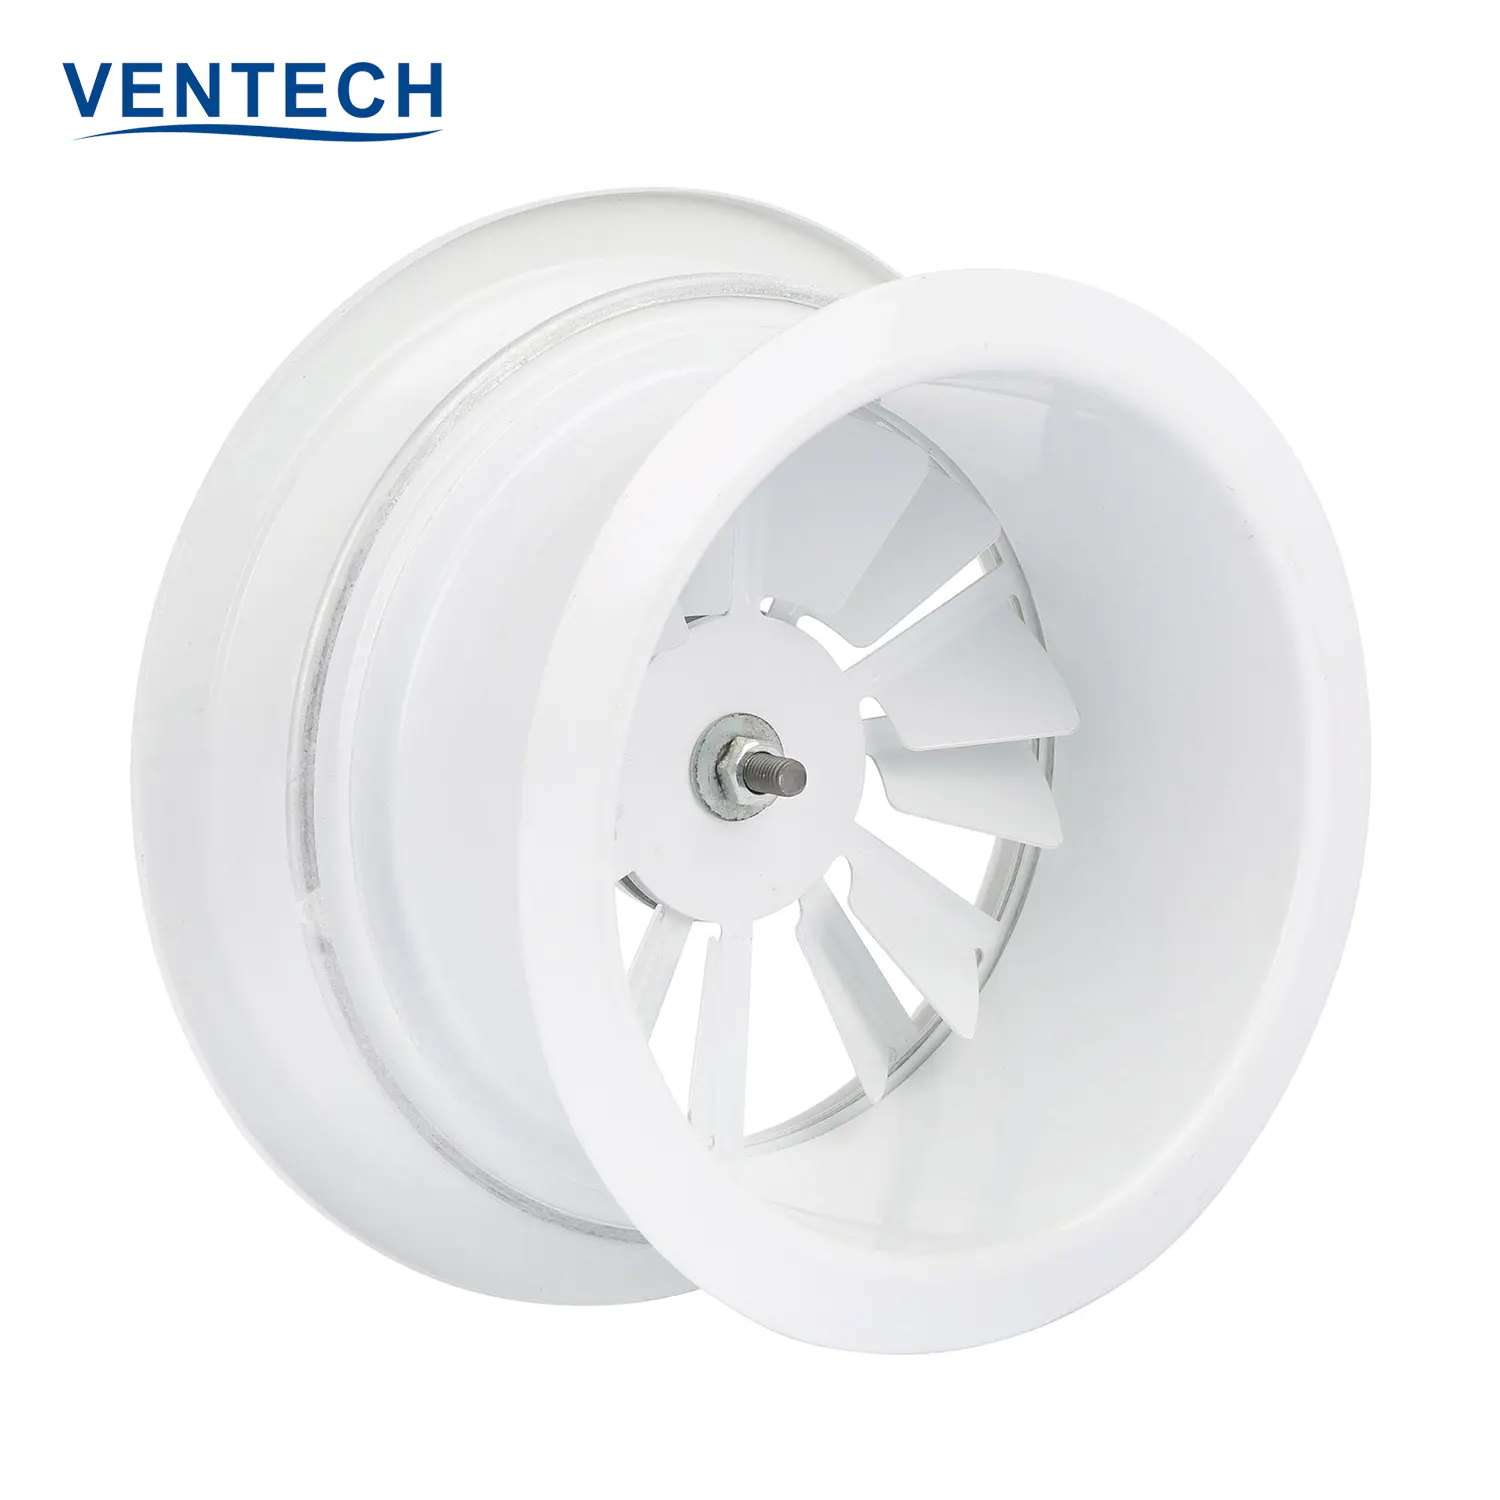 Ventech customized Vane Axial Fan Aluminum alloy Adjustable Blades Swirl Air Diffuser for Swirl diffuser